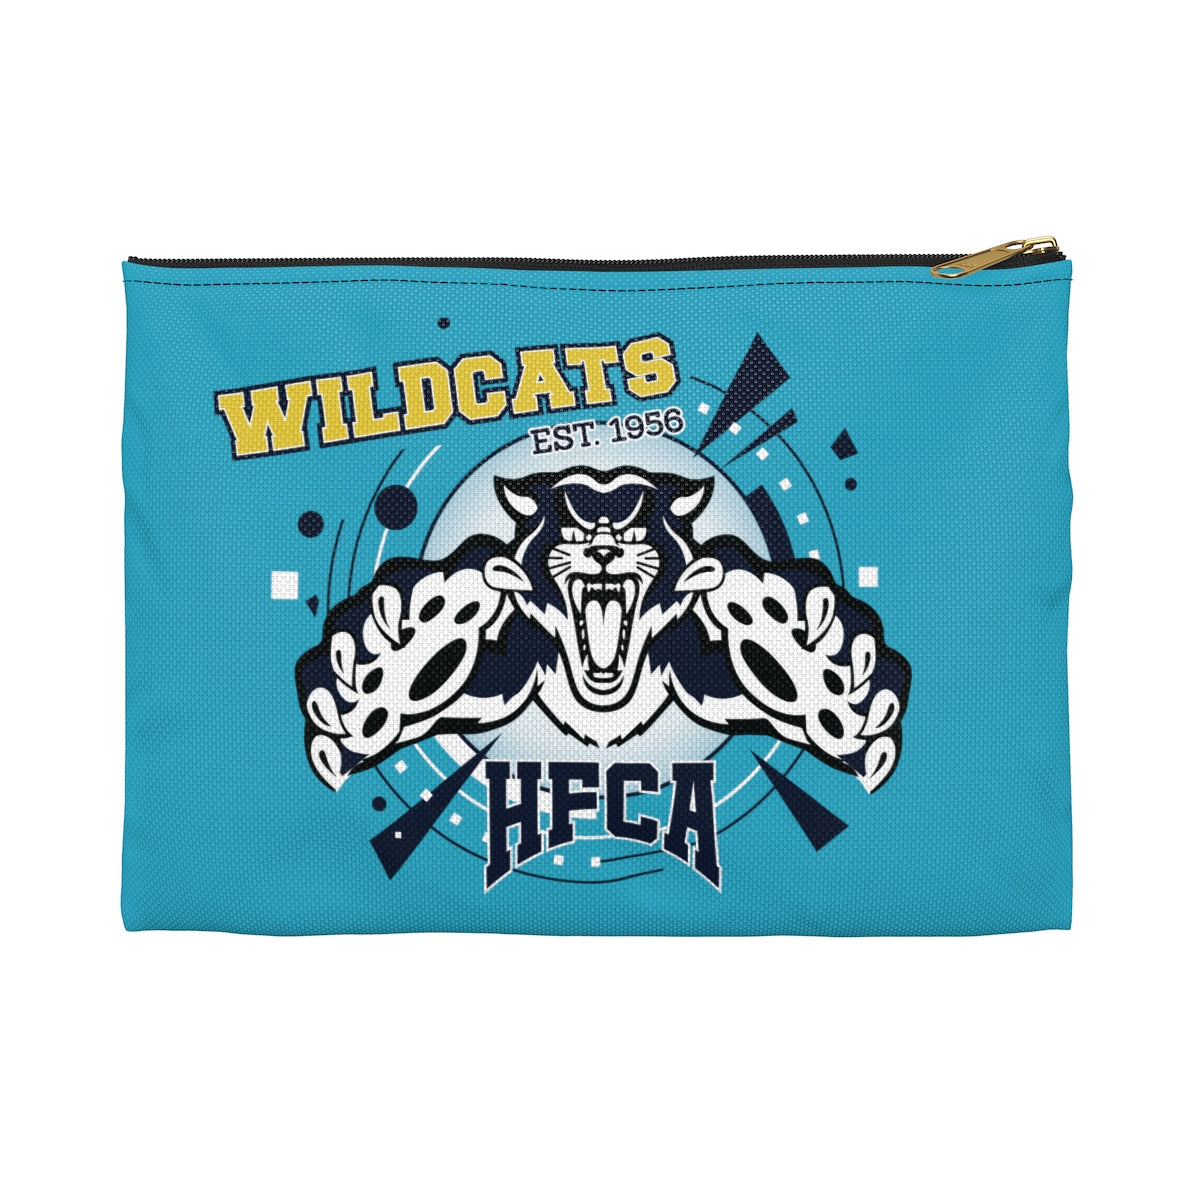 Holy Family Catholic Academy (HFCA) - "Wildcat Pride" - Accessory Pouch